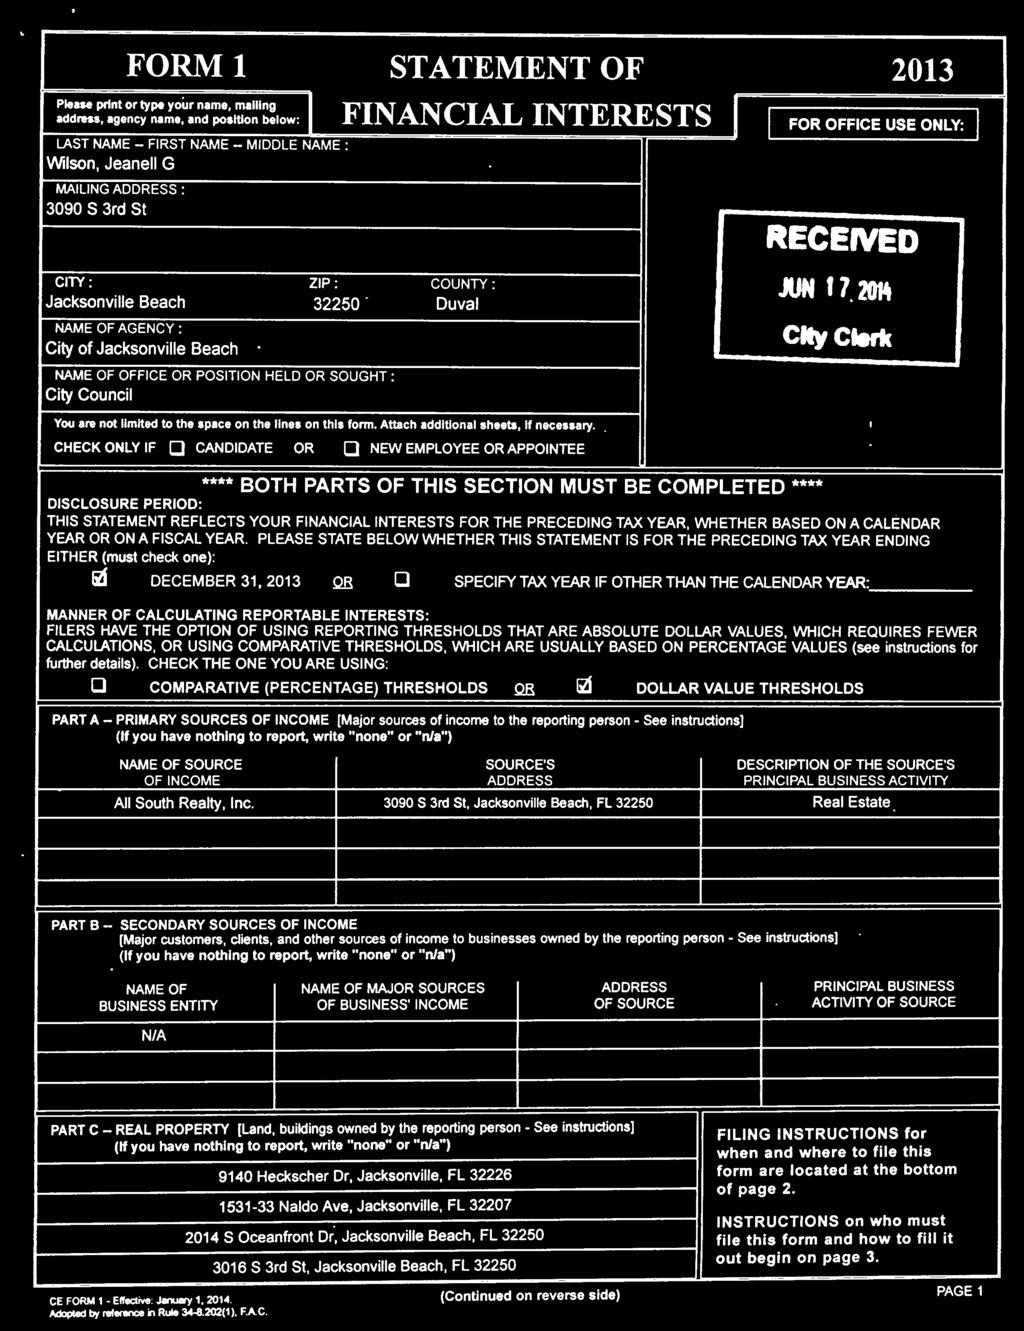 20t NAME OF AGENCY : City Clerk City of Jacksonville Beach NAME OF OFFICE OR POSITION HELD OR SOUGHT : City Council You are not limited to the space on the lines on this form.